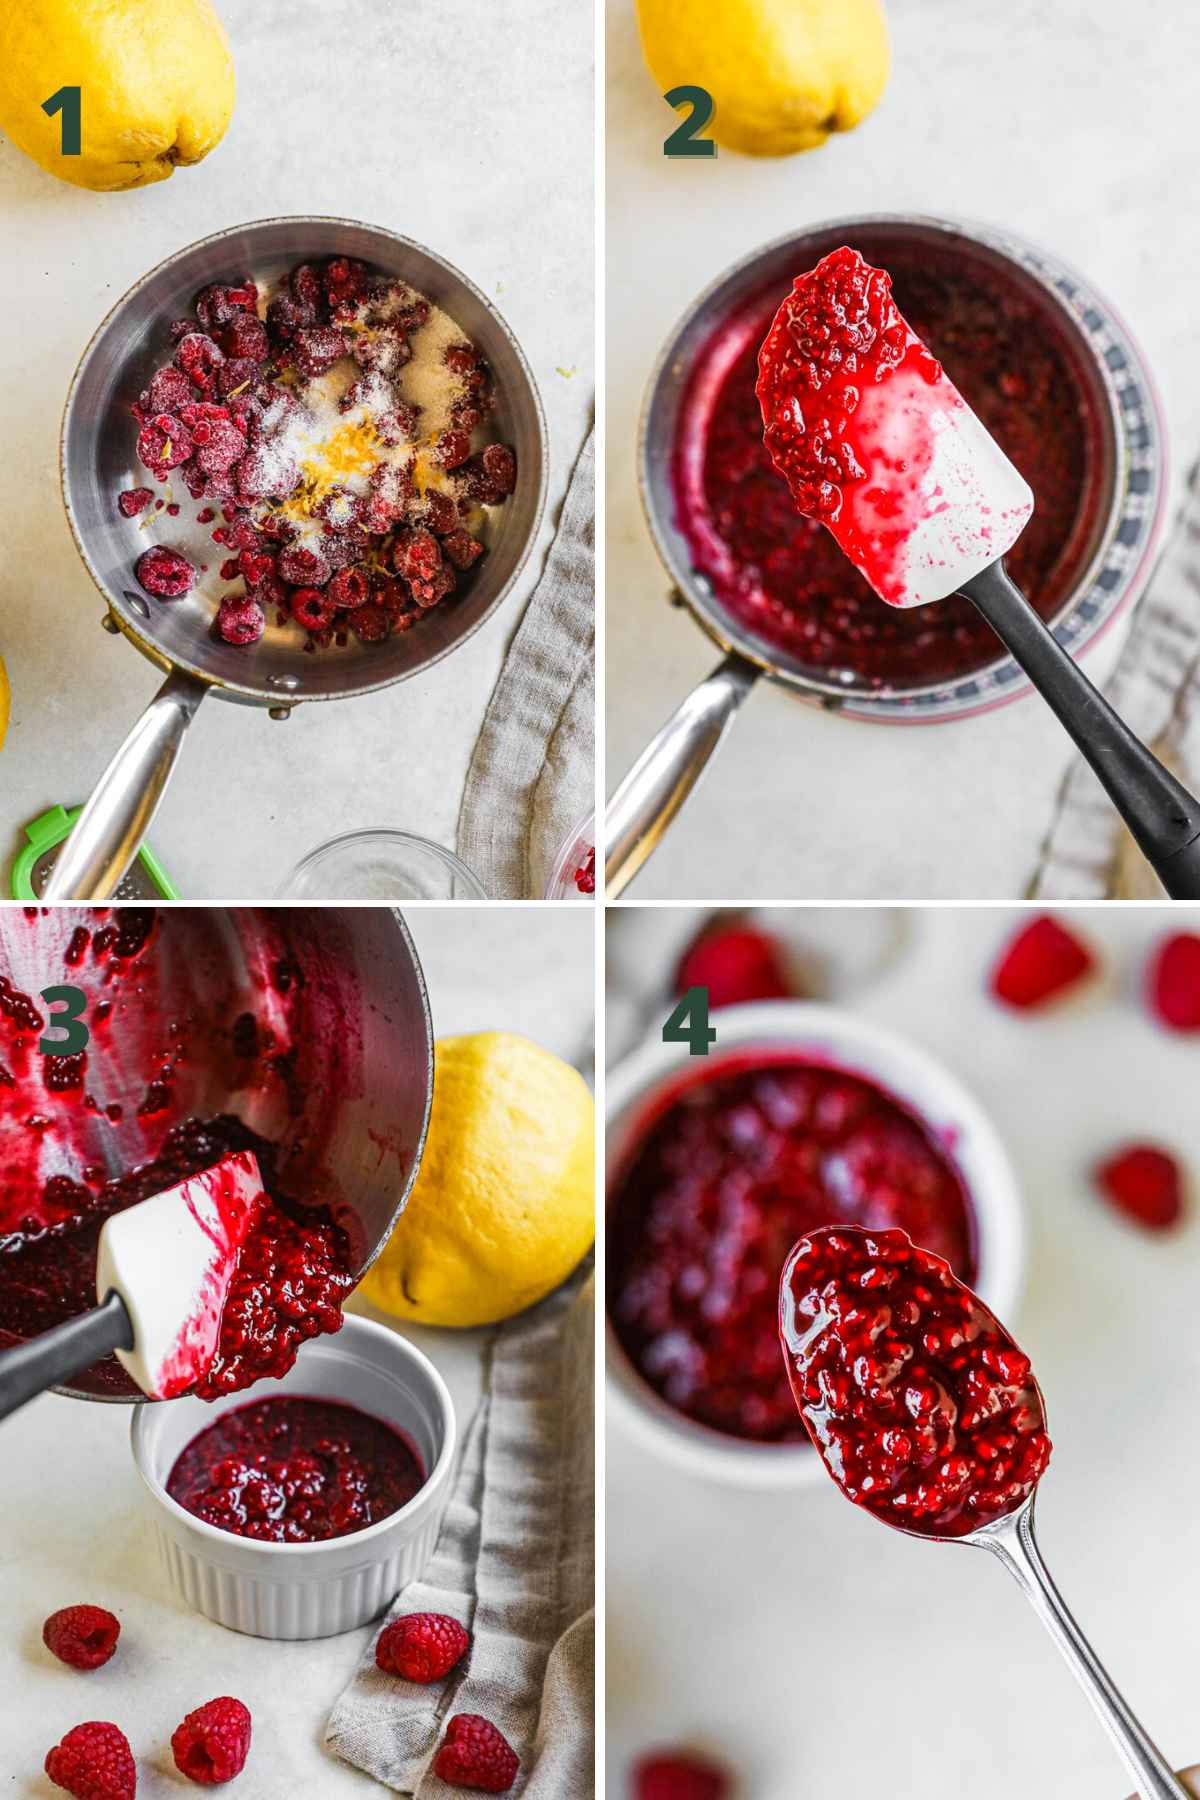 How to make 3-ingredient raspberry compote, including cooking and stirring raspberries, lemon zest and juice, and sugar until syrupy, then serving.